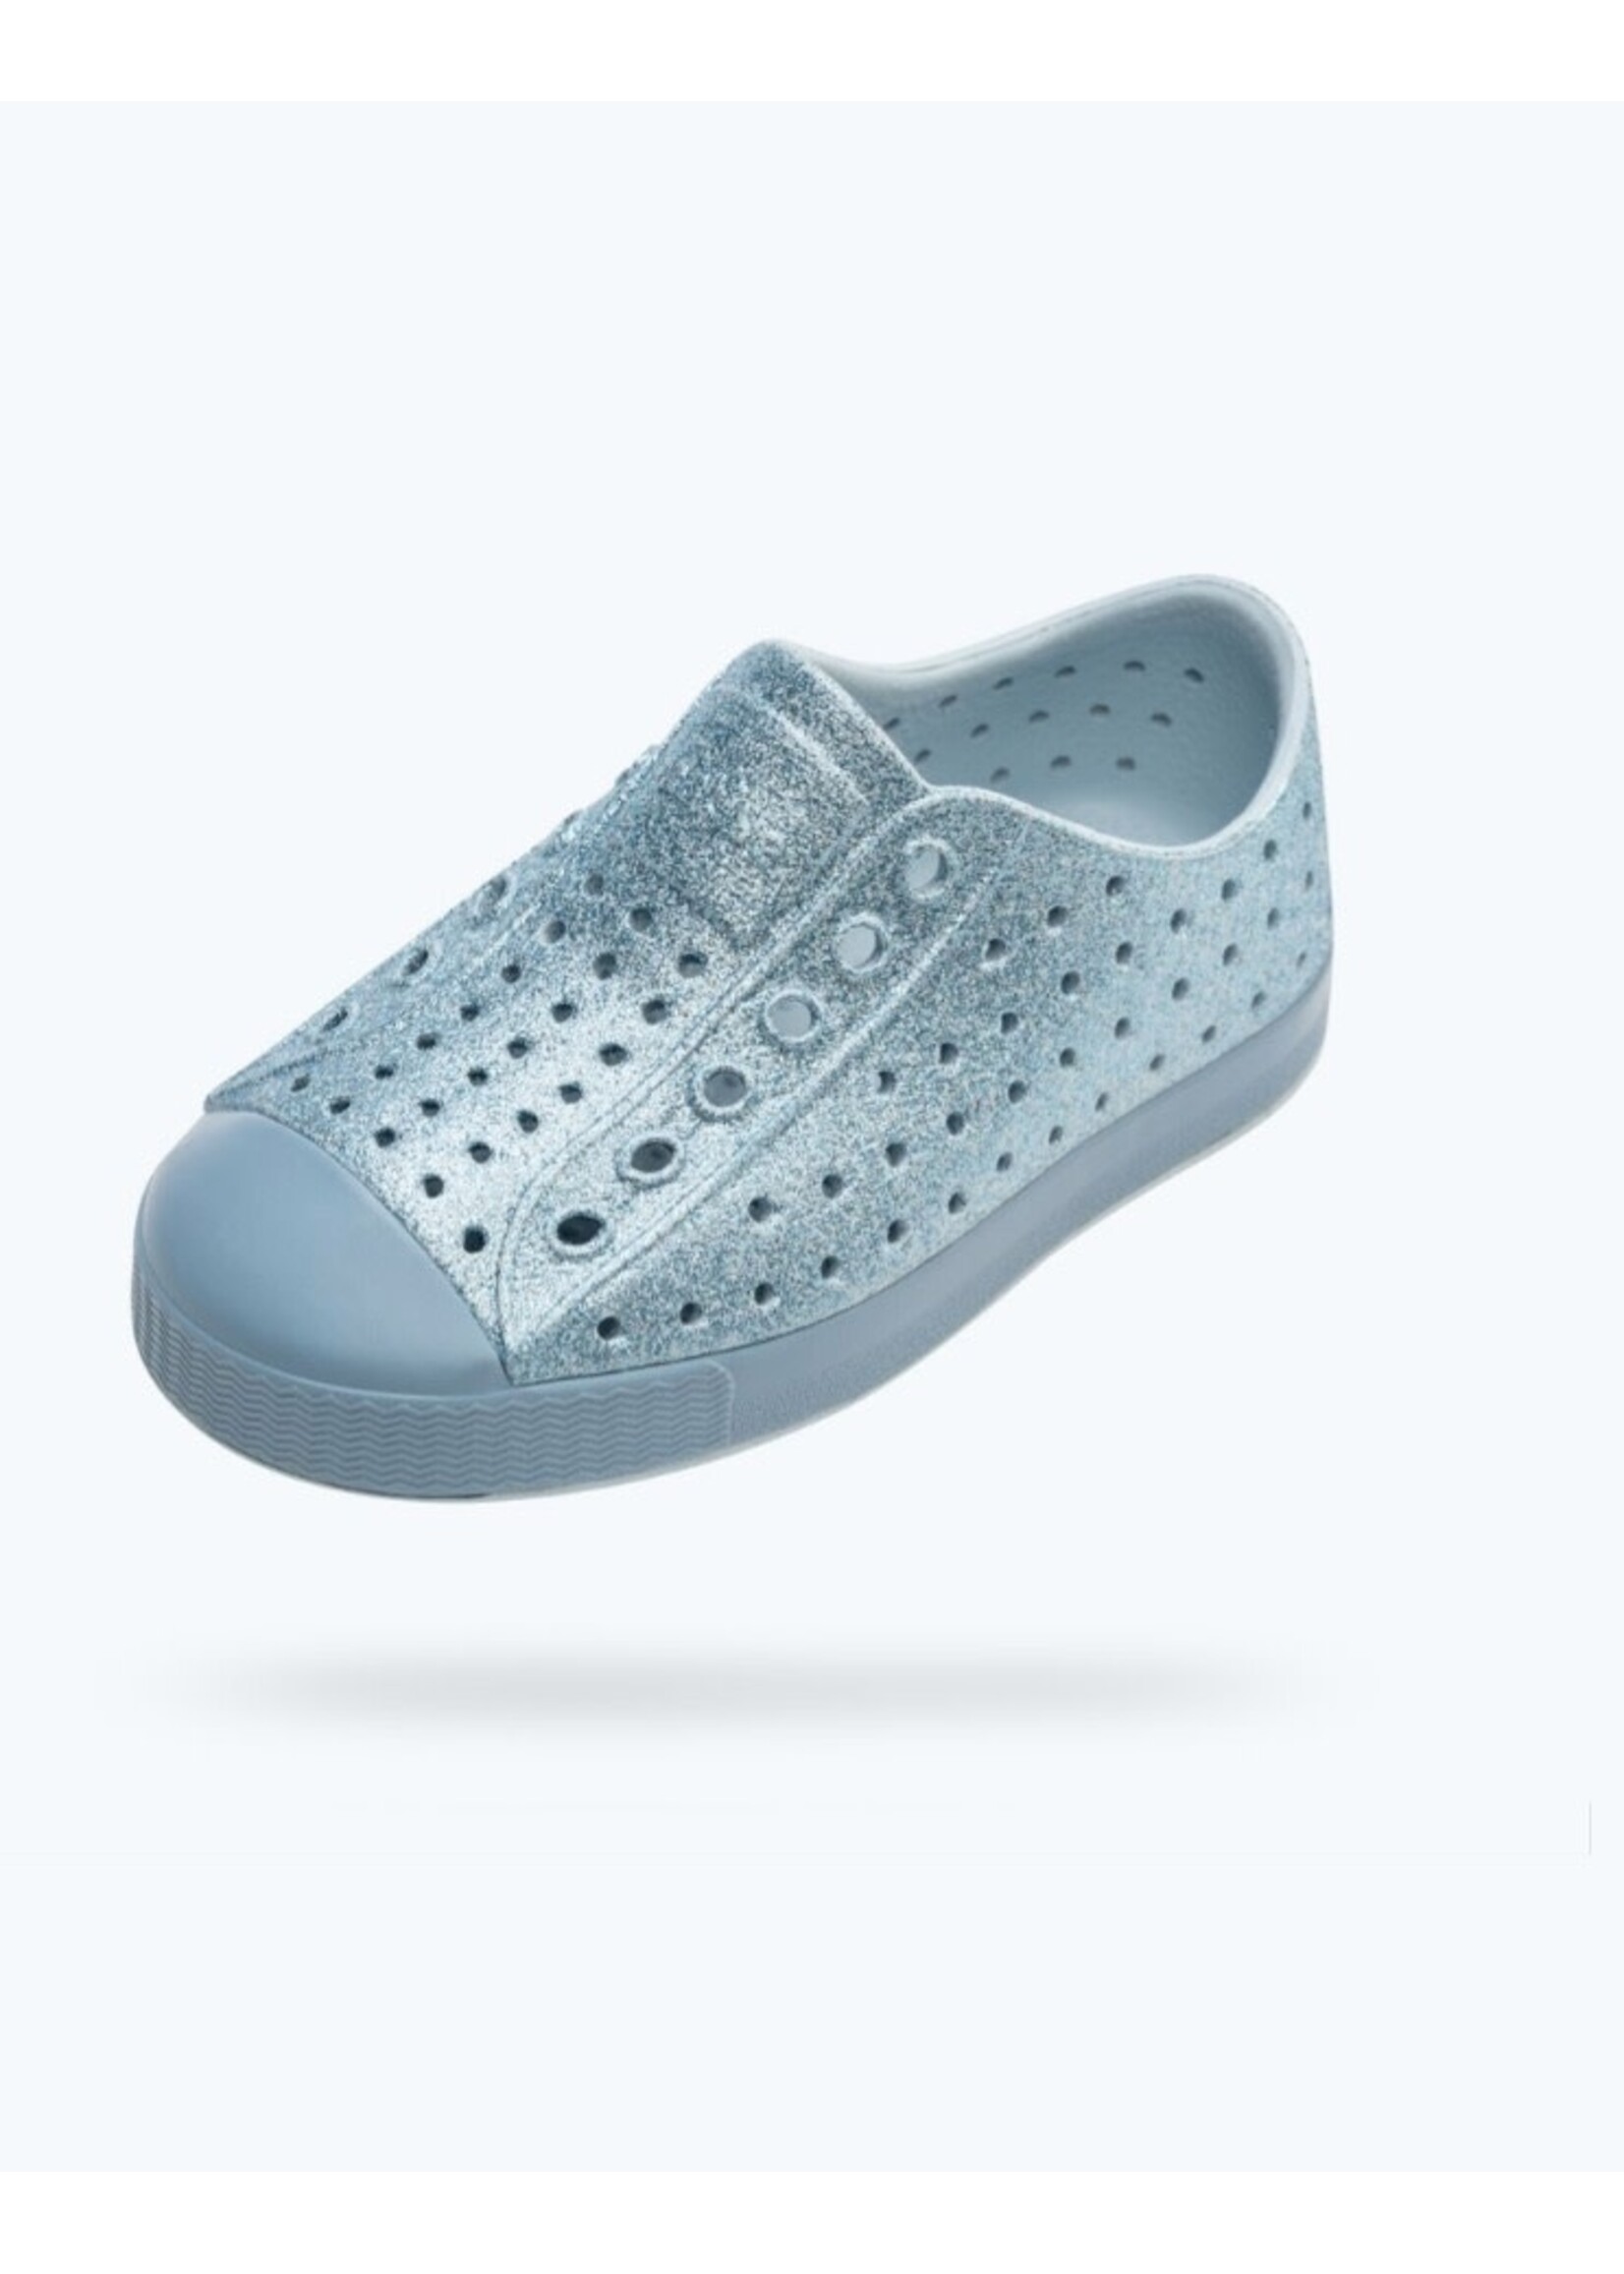 Native Shoes Native Shoes, Jefferson Bling Child || Air Bling/ Oxygen Blue